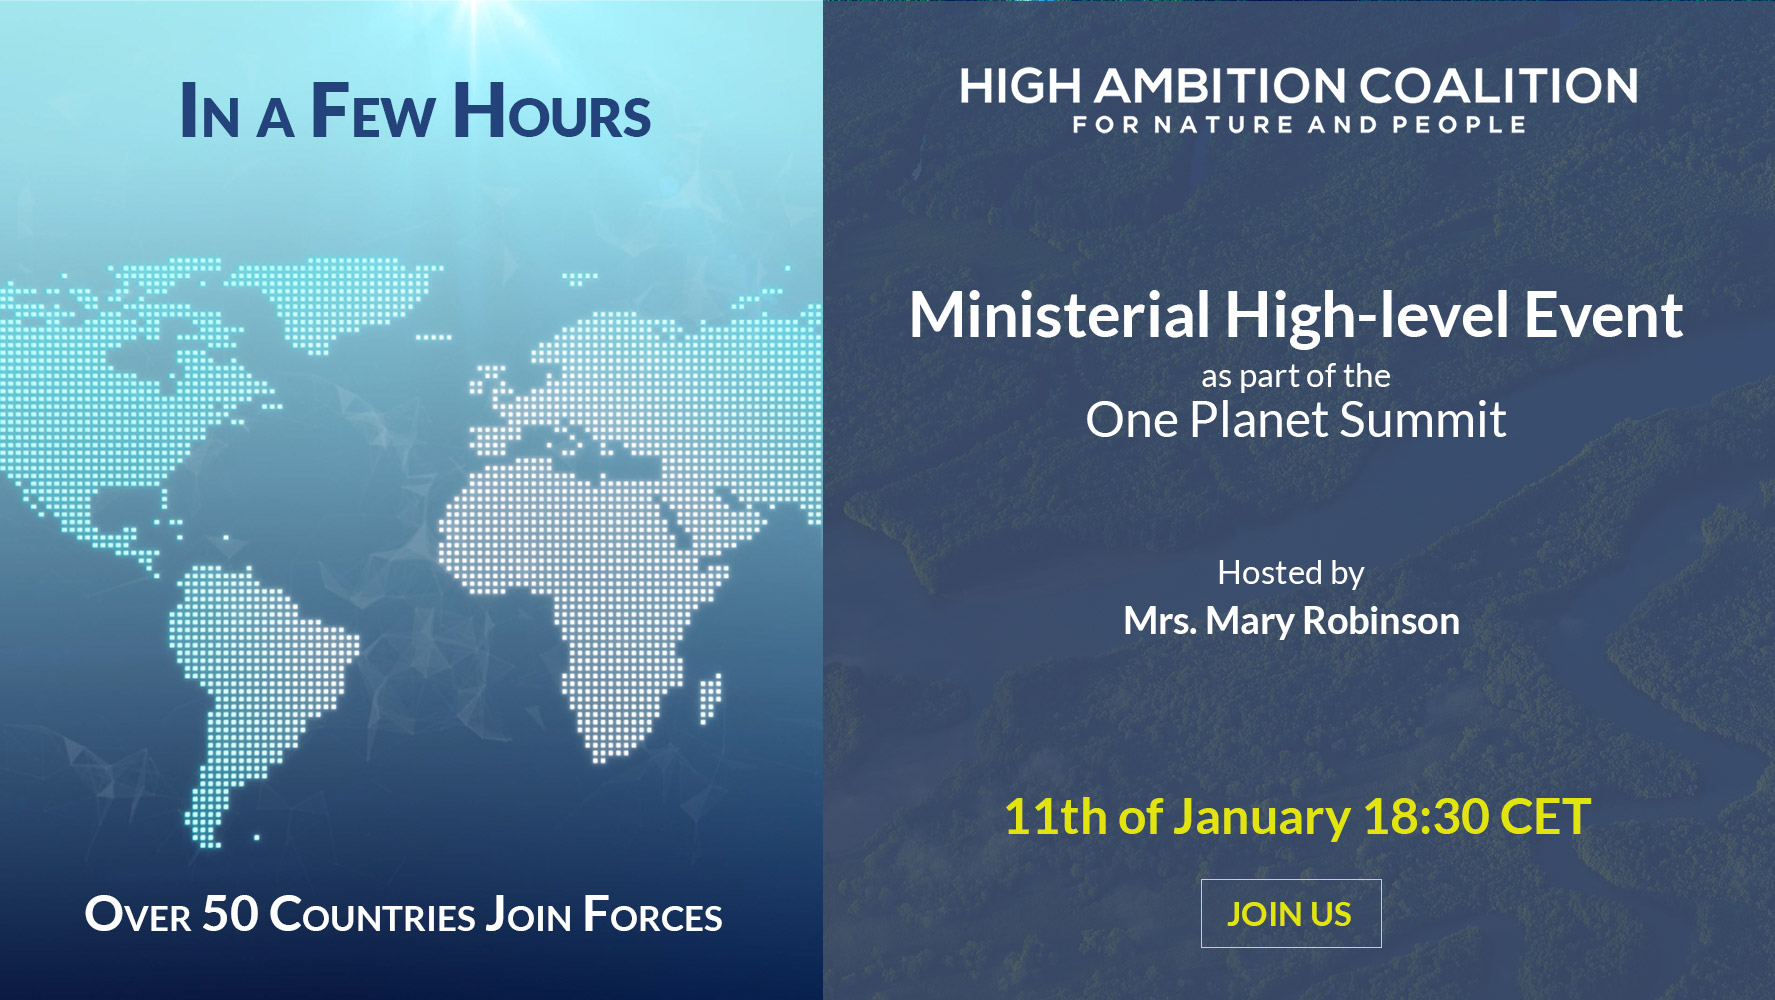 HACfornatureandpeople on Twitter: "Join in a hours the Ministerial High- level Event for the High Ambition Coalition for Nature and People! Over 45 countries have in 30x30 effort. Learn more at